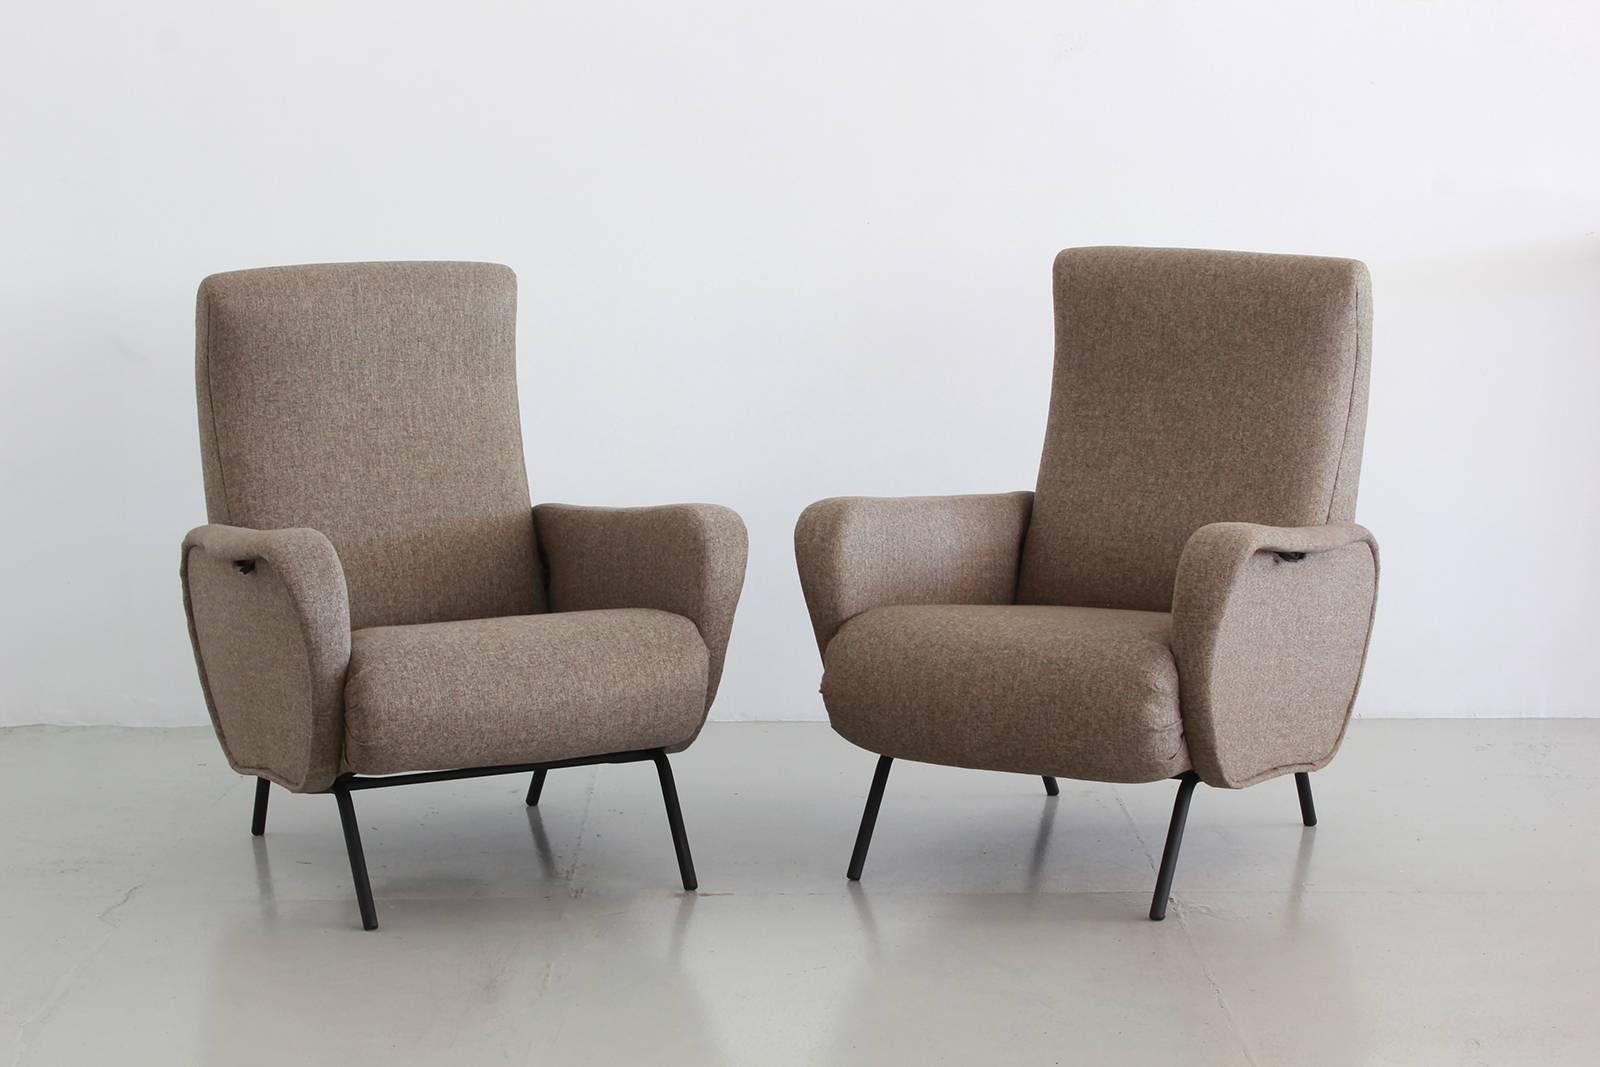 Wonderful pair of Italian reclining chairs reupholstered in heather felted wool.